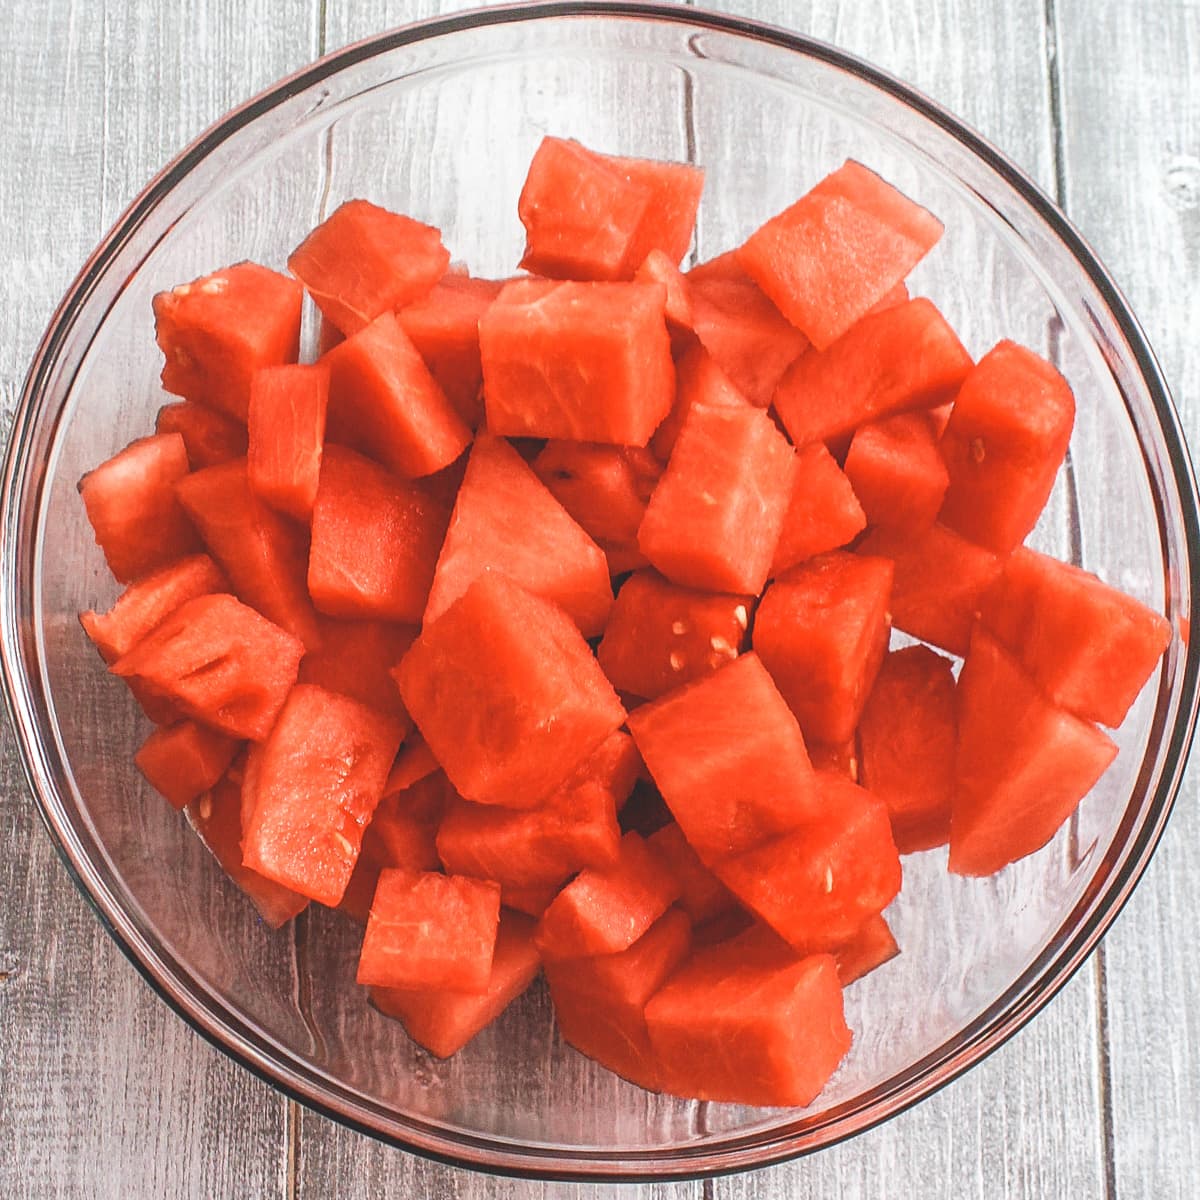 Watermelon cubes in a glass bowl.